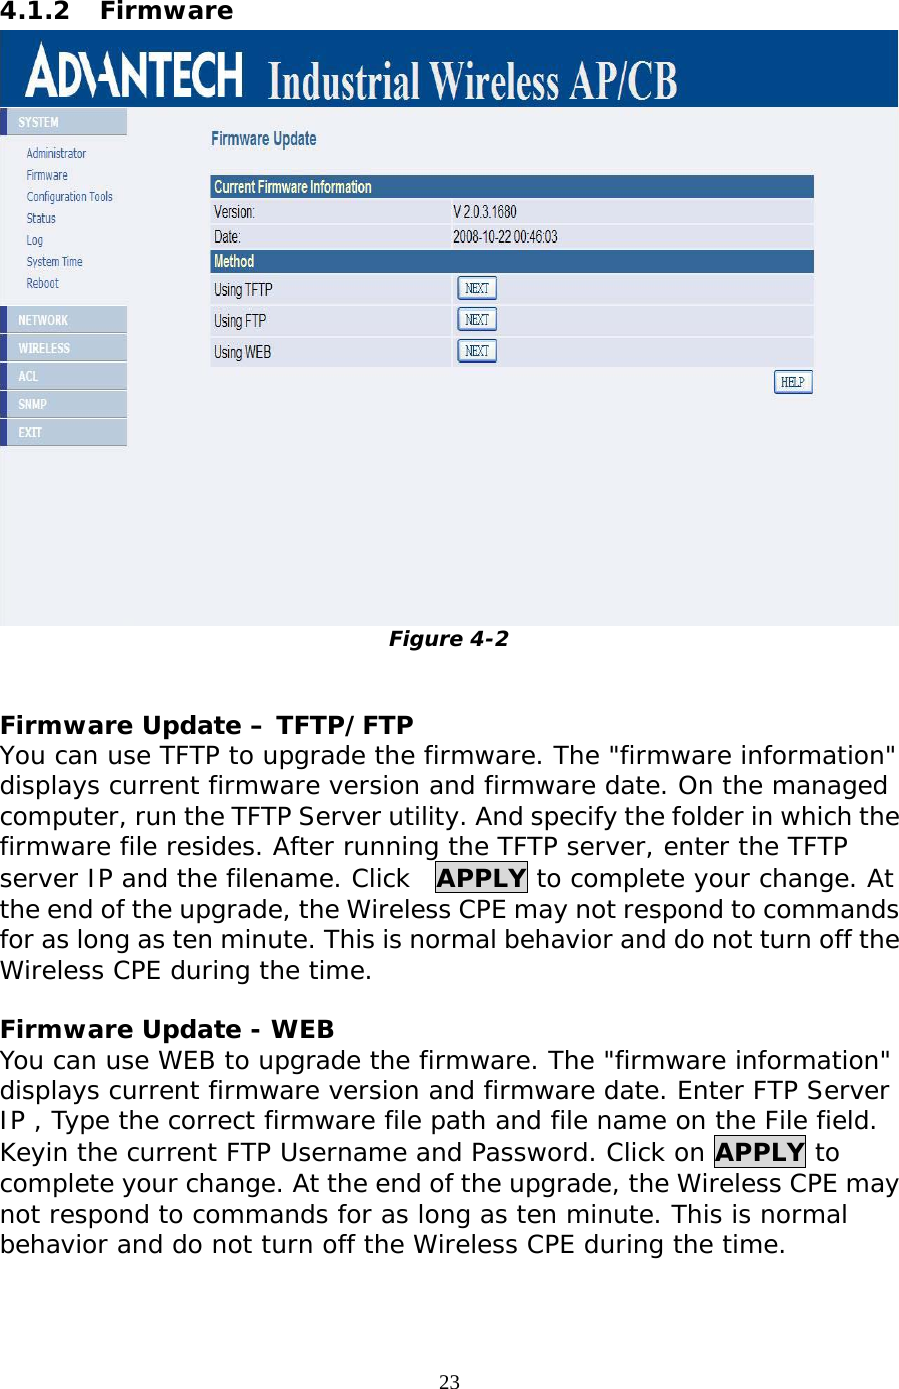                   4.1.2 Firmware  Figure 4-2  Firmware Update – TFTP/FTP You can use TFTP to upgrade the firmware. The &quot;firmware information&quot; displays current firmware version and firmware date. On the managed computer, run the TFTP Server utility. And specify the folder in which the firmware file resides. After running the TFTP server, enter the TFTP server IP and the filename. Click  APPLY to complete your change. At the end of the upgrade, the Wireless CPE may not respond to commands for as long as ten minute. This is normal behavior and do not turn off the Wireless CPE during the time. Firmware Update - WEB You can use WEB to upgrade the firmware. The &quot;firmware information&quot; displays current firmware version and firmware date. Enter FTP Server IP , Type the correct firmware file path and file name on the File field. Keyin the current FTP Username and Password. Click on APPLY to complete your change. At the end of the upgrade, the Wireless CPE may not respond to commands for as long as ten minute. This is normal behavior and do not turn off the Wireless CPE during the time.23 